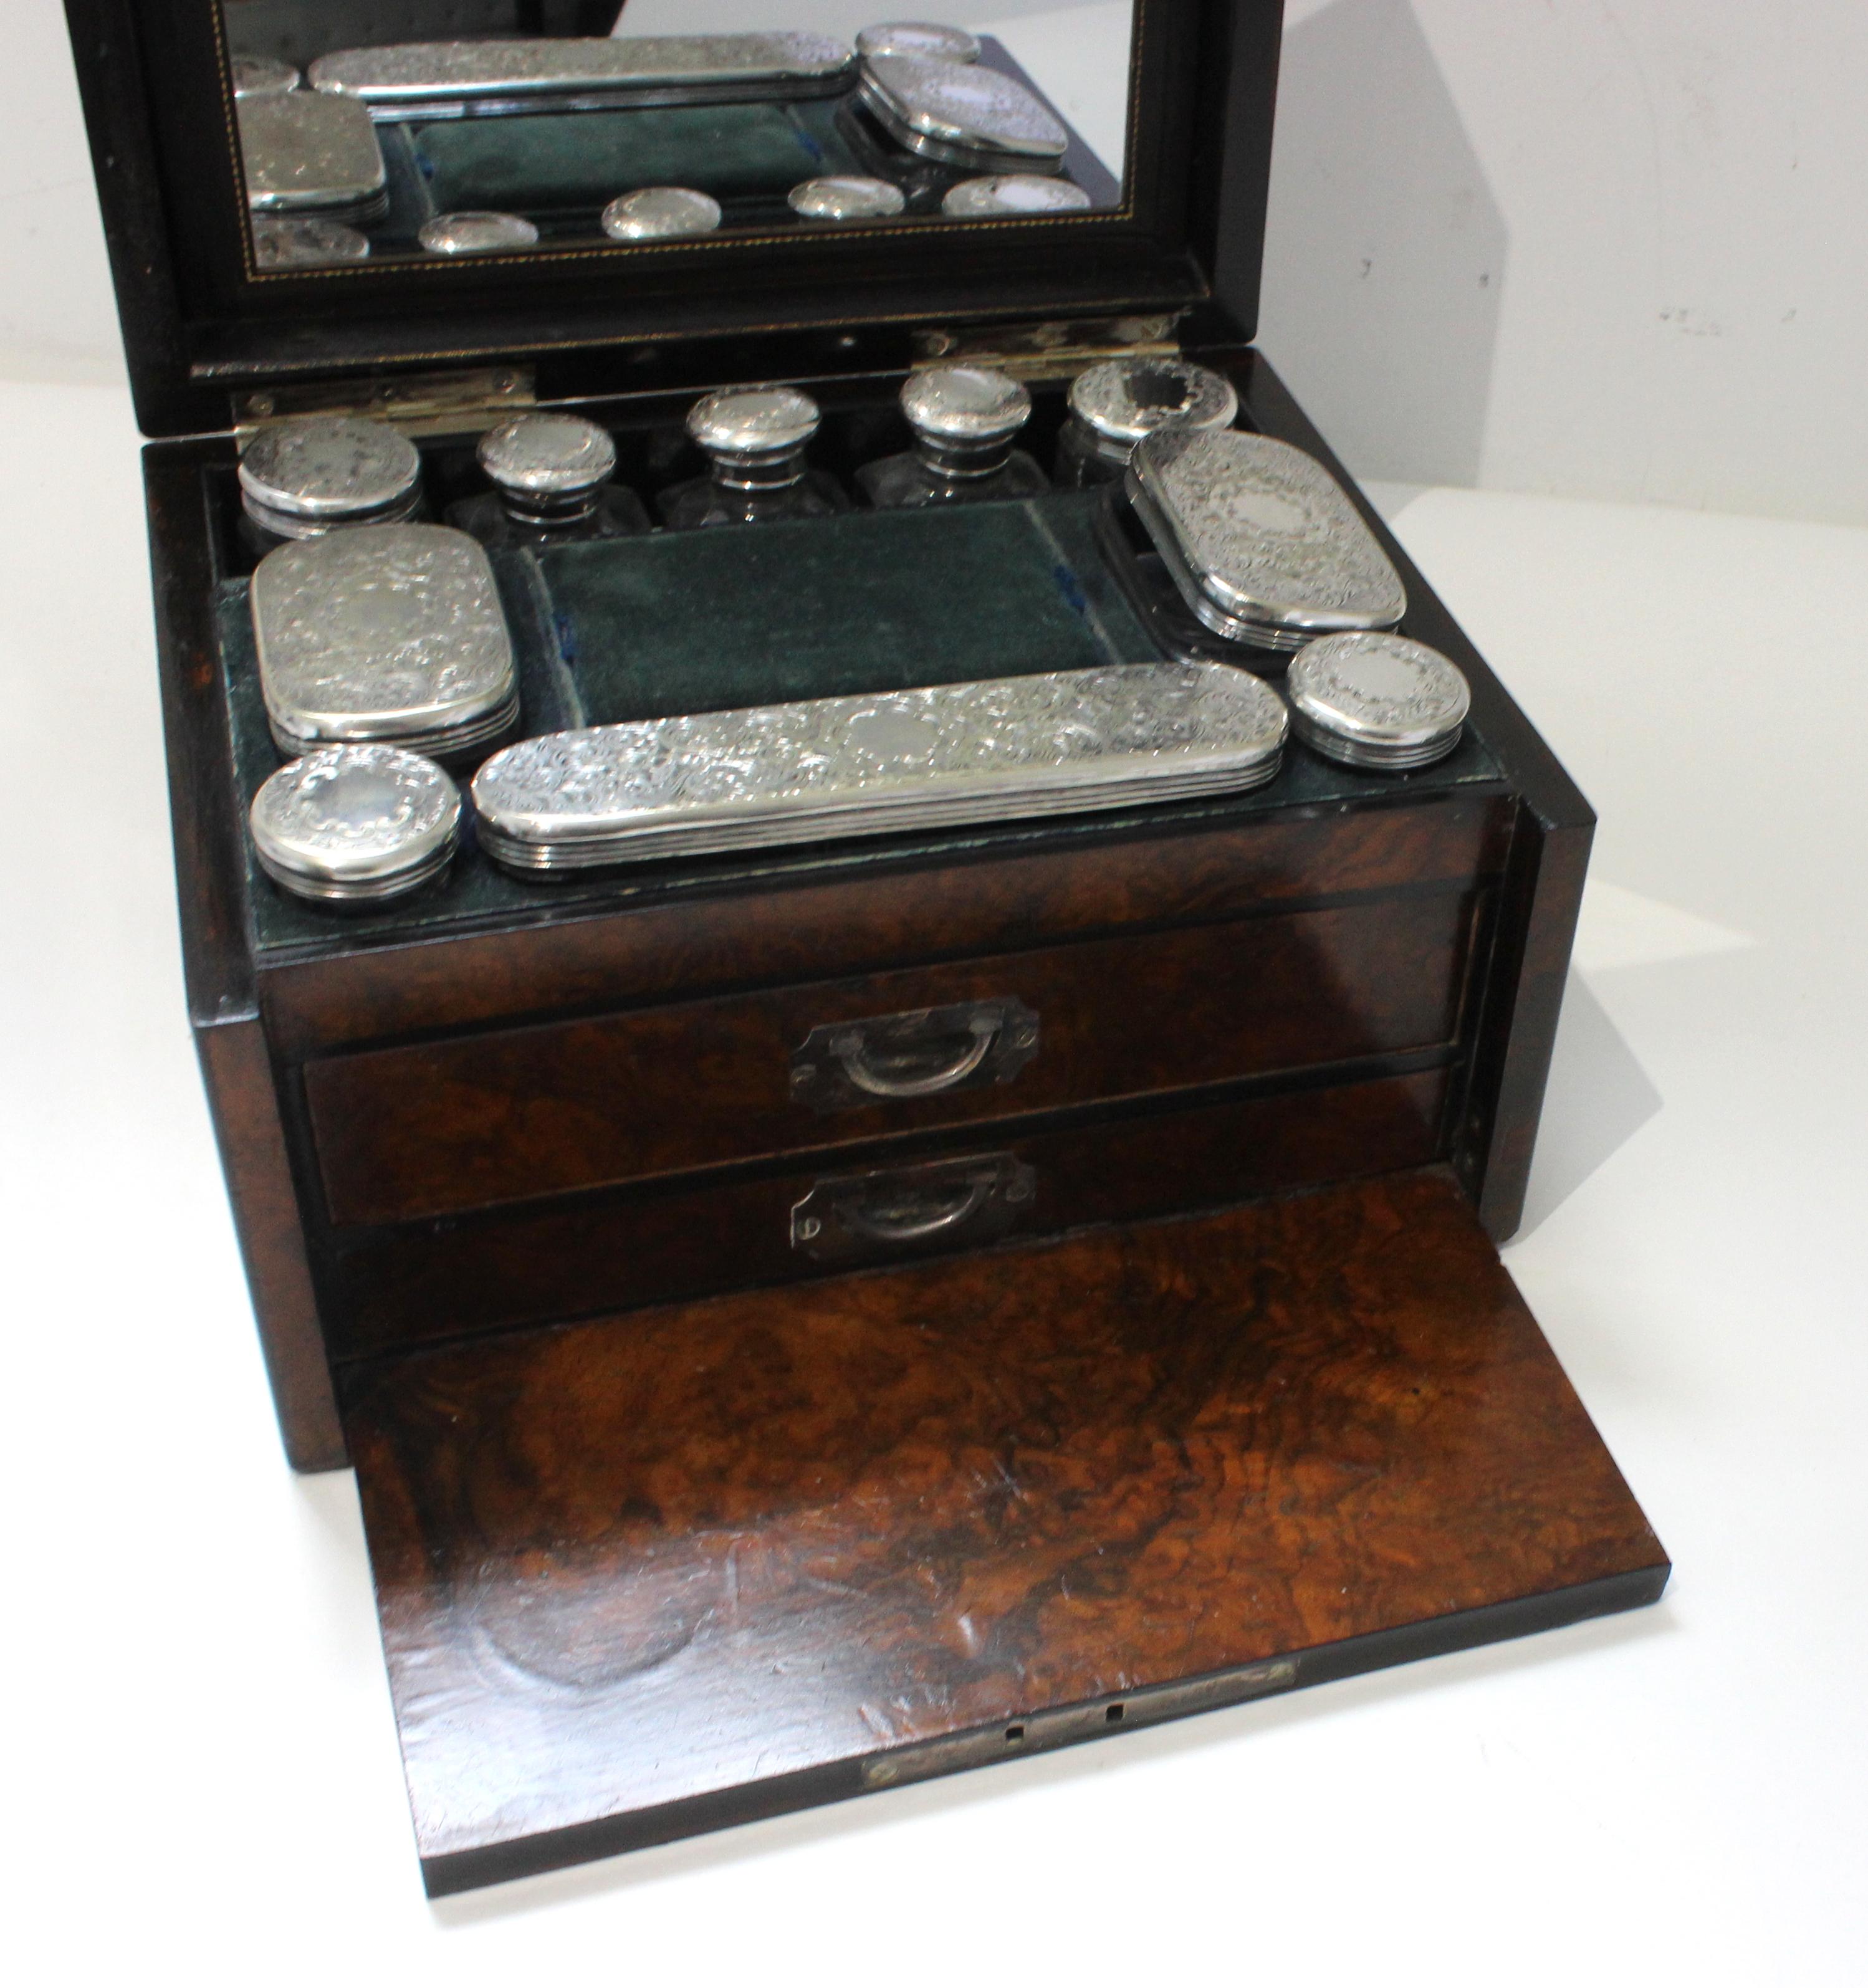 This stylish and chic English traveling case dates to the 19th century, and the piece is fabricated in velvet, burlwood, ebony and brass. The case interior holds ten storage pieces, which are fabricated in cut glass and silverplated tops. 

Note: